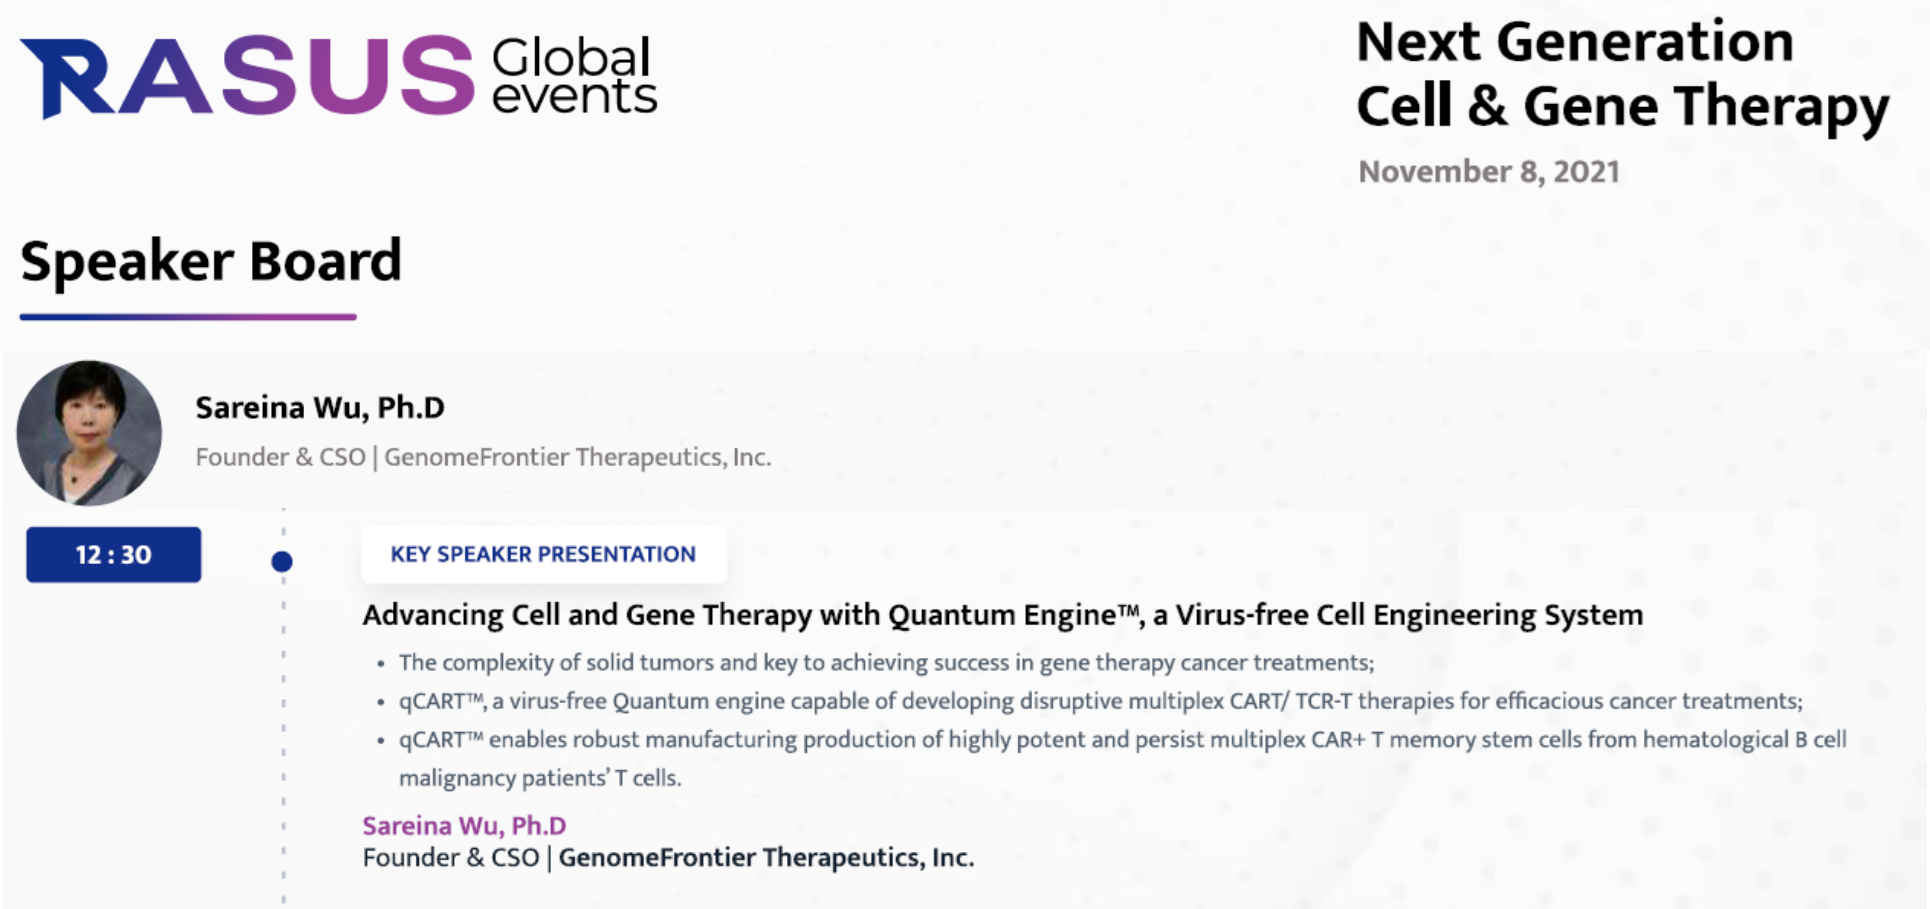 Our founder/CEO/CSO, Sareina Wu, was invited to speak at the RASUS Global events: Next Generation Cell & Gene Therapy conference. (November 8-9, 2021)